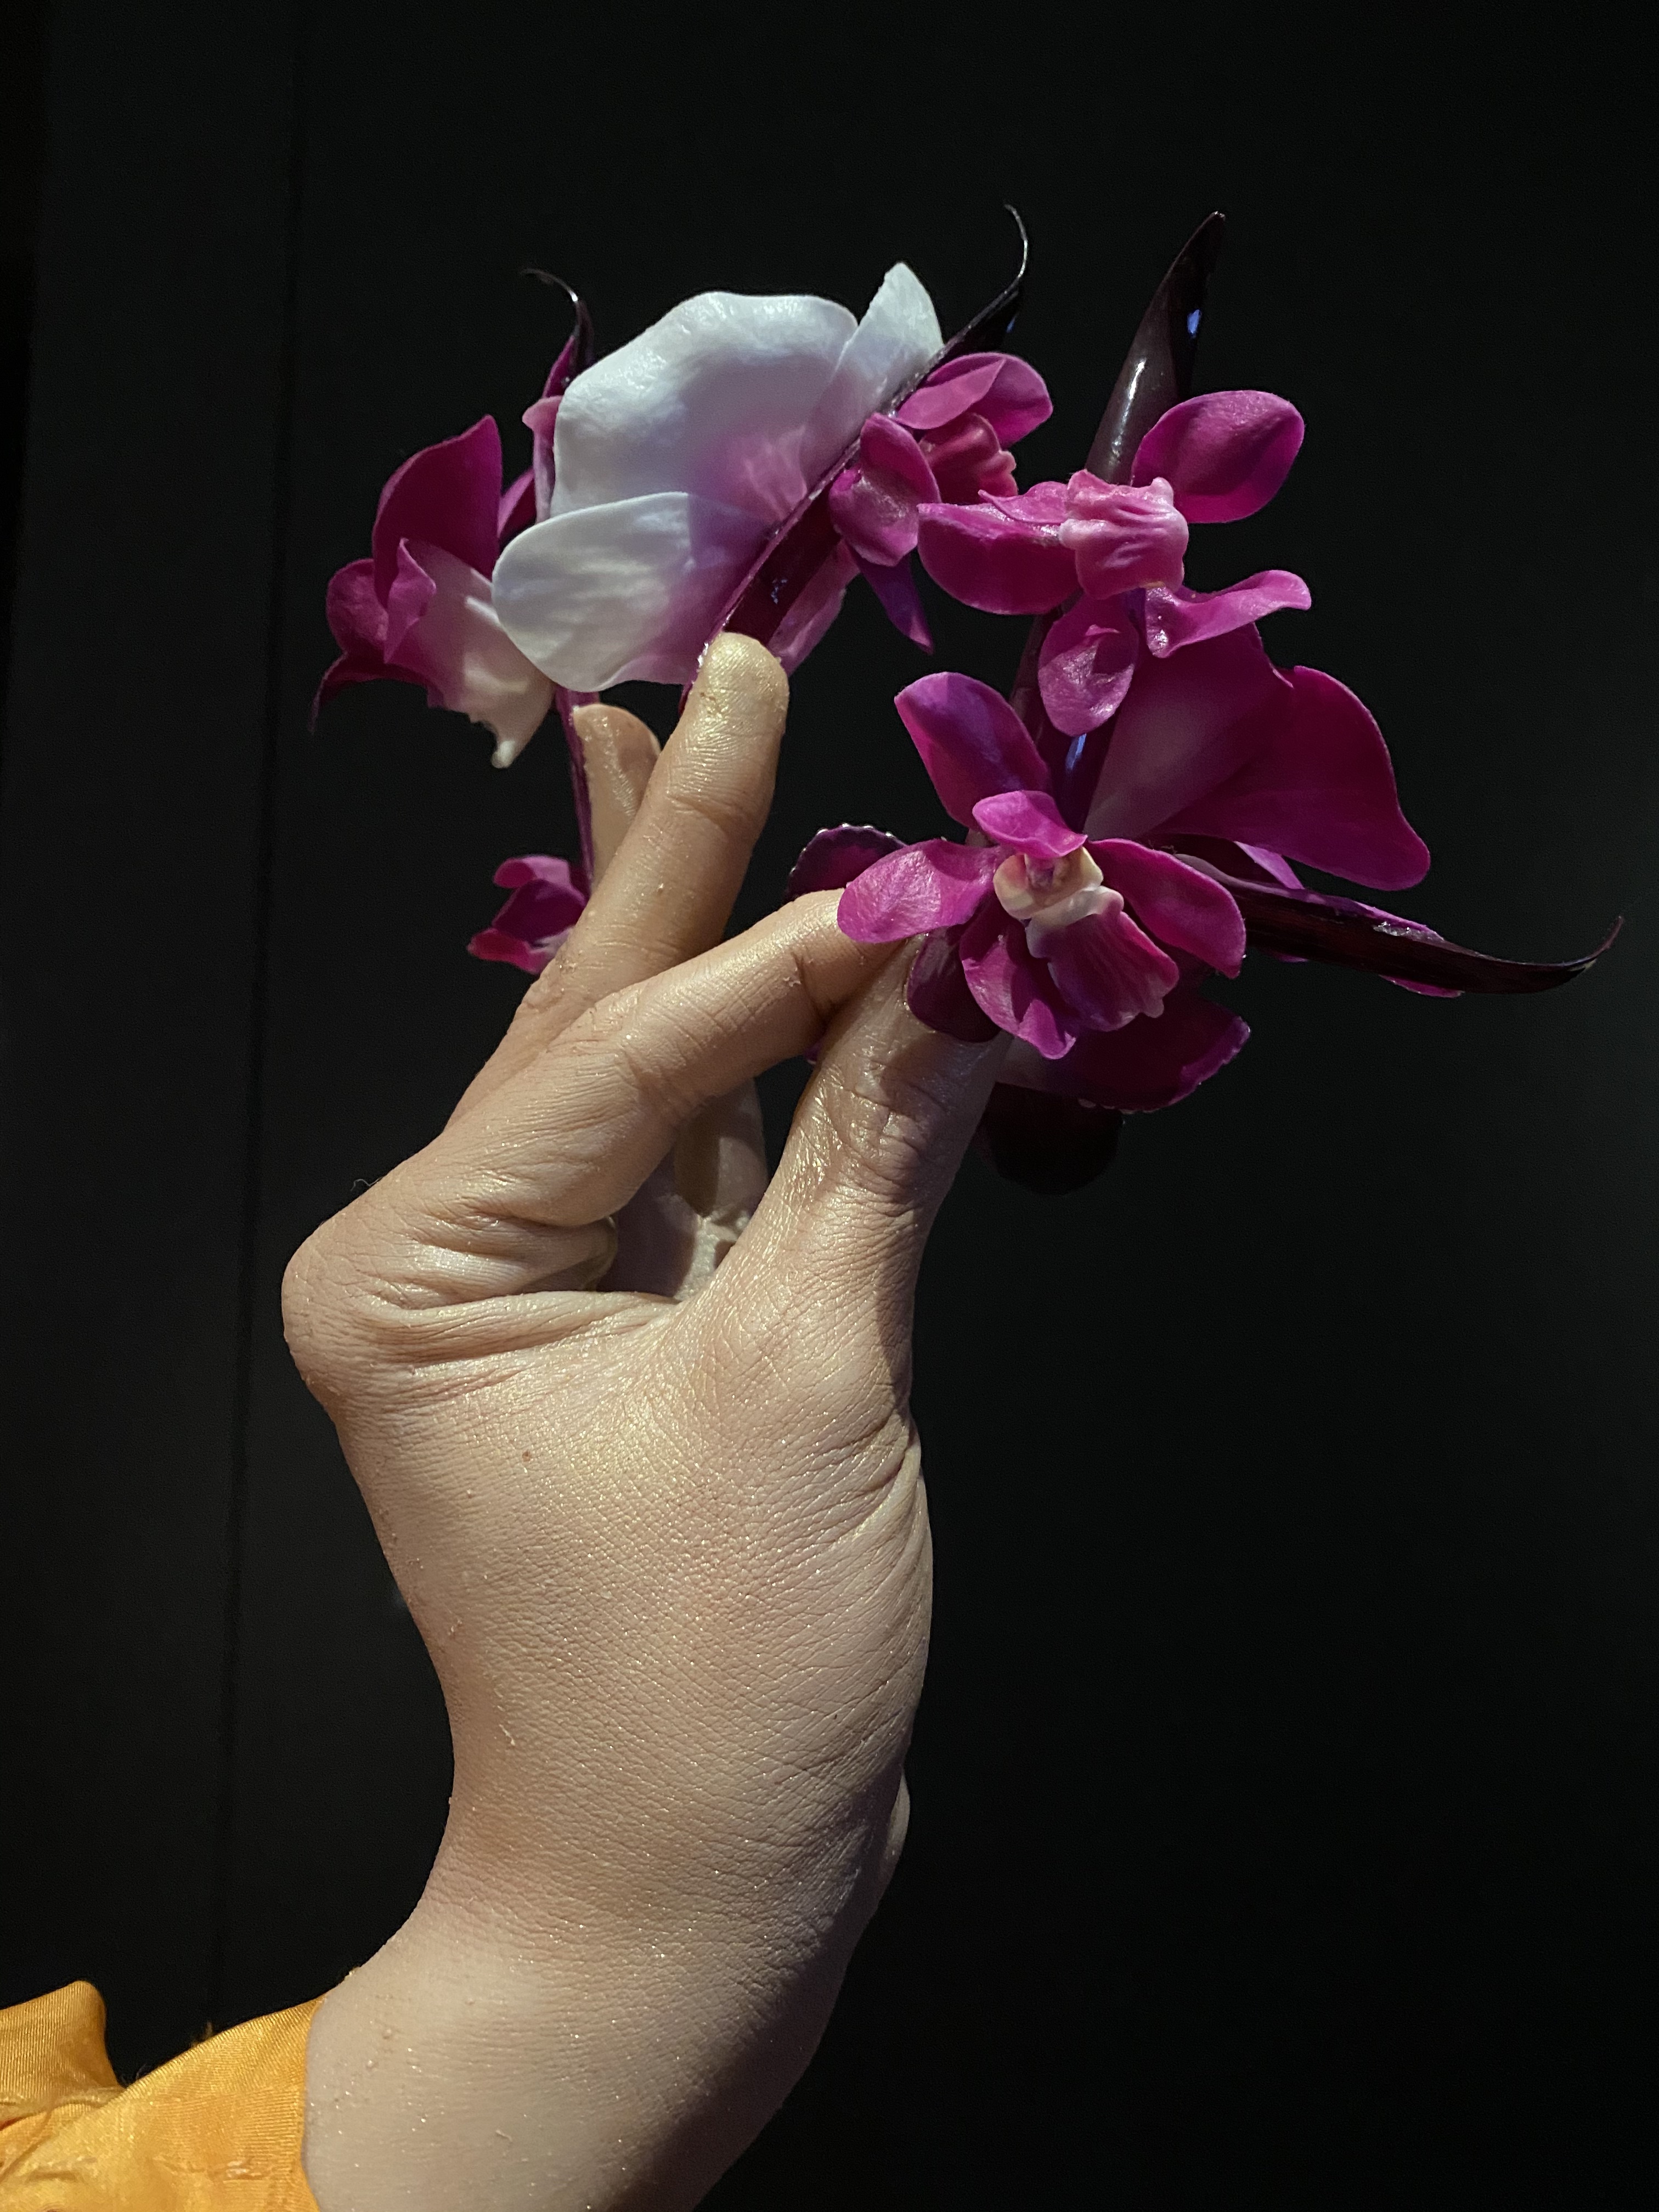 DETAIL from a sculpture, showing a hand with long purple acrylic nails holding orchids.